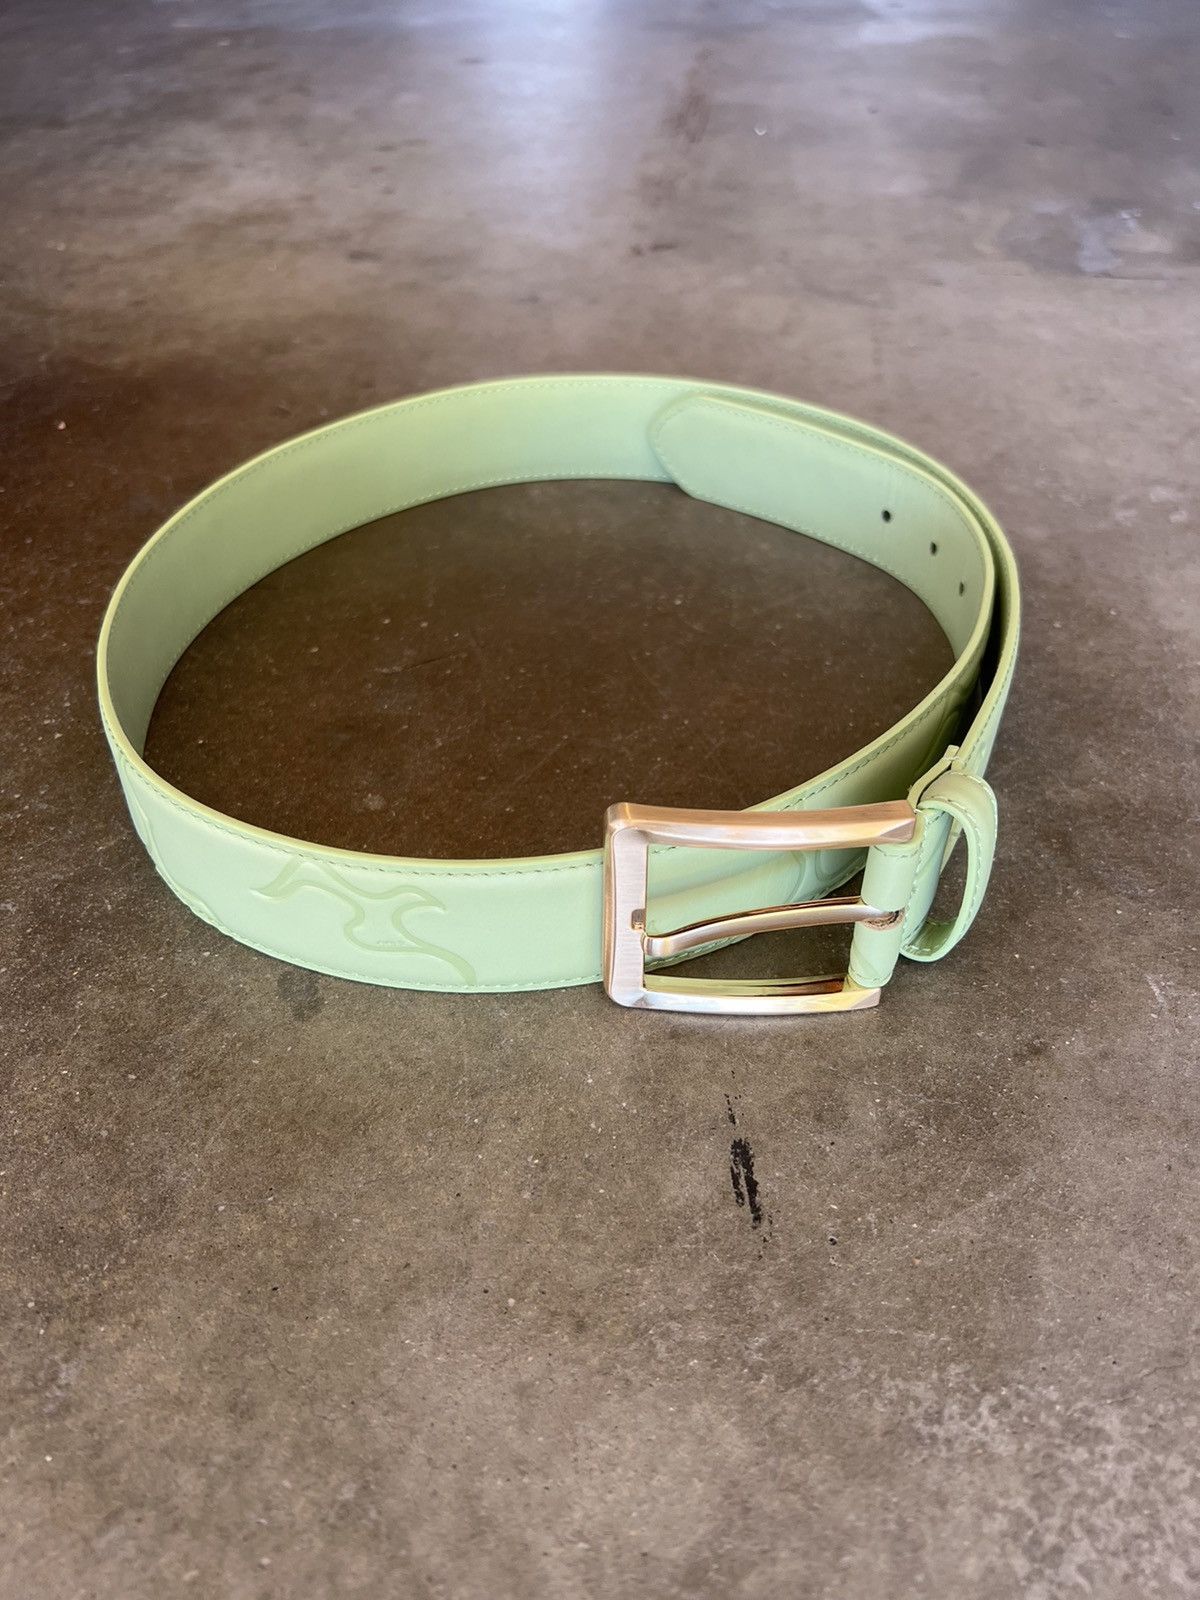 Golf Wang DS Golf Wang Debossed Flame Leather Belt Sage